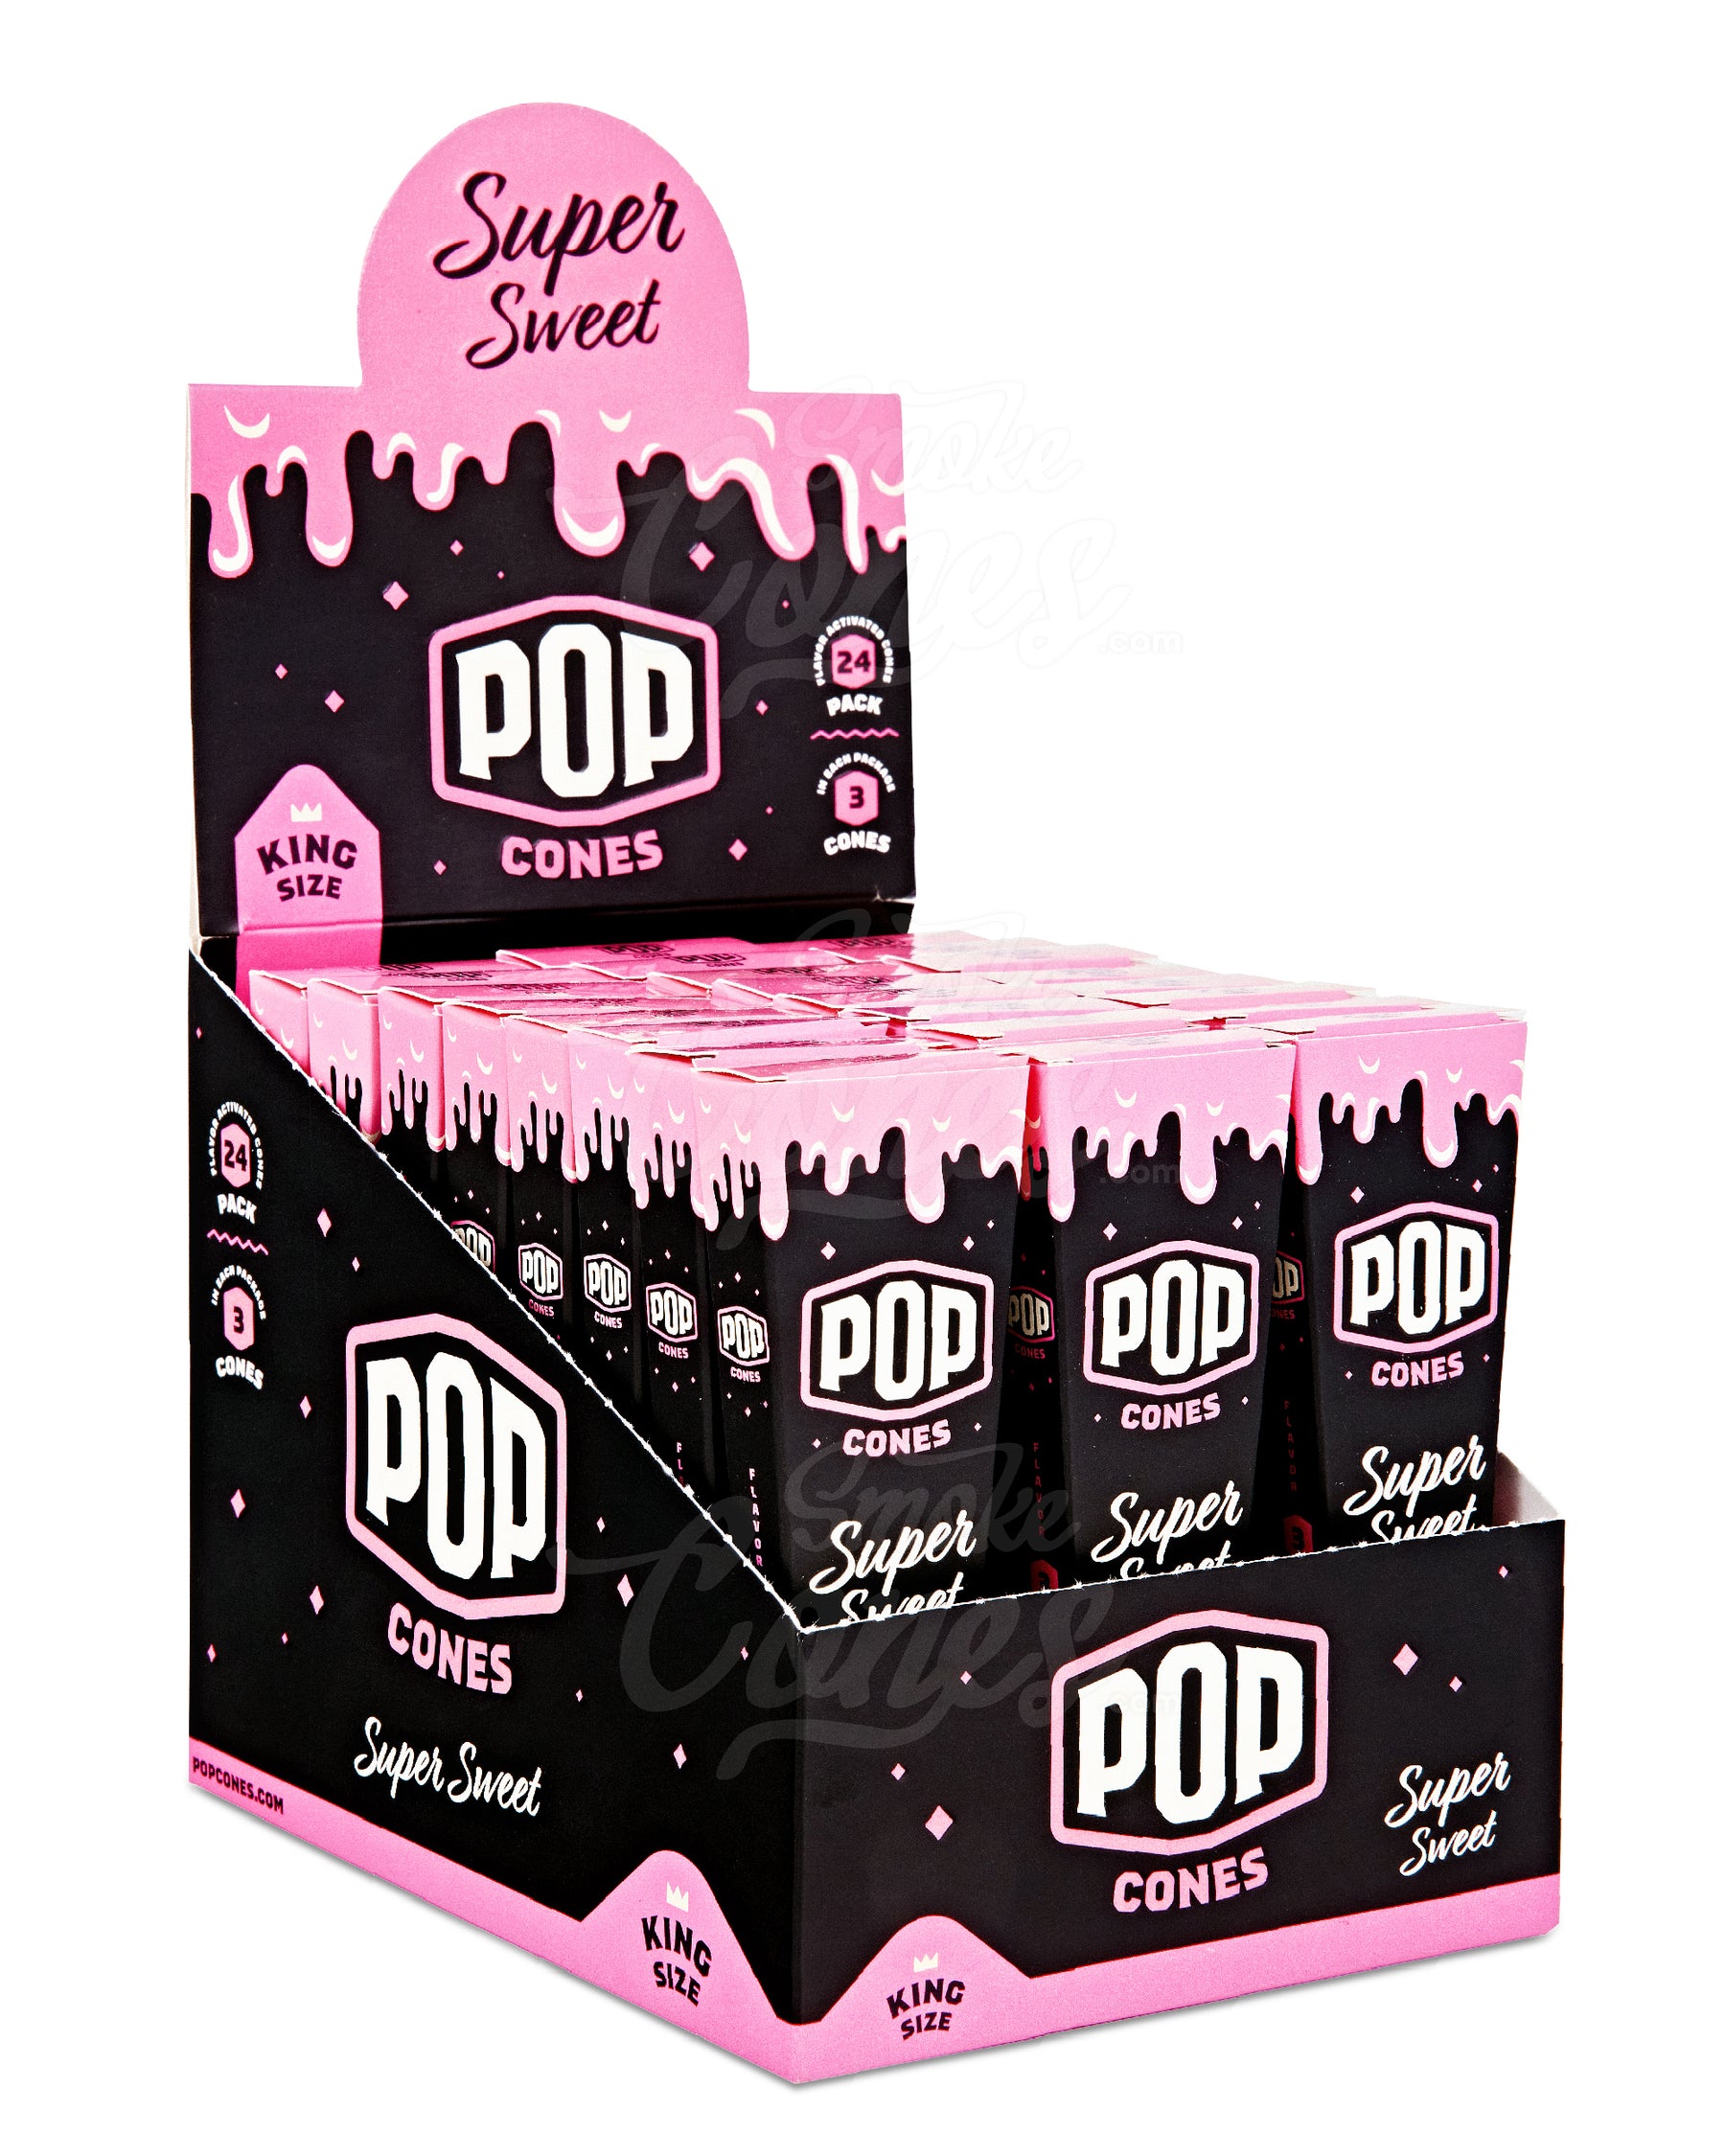 Pop Cones Super Sweet 109mm King Sized Pre Rolled Cones 24/Box